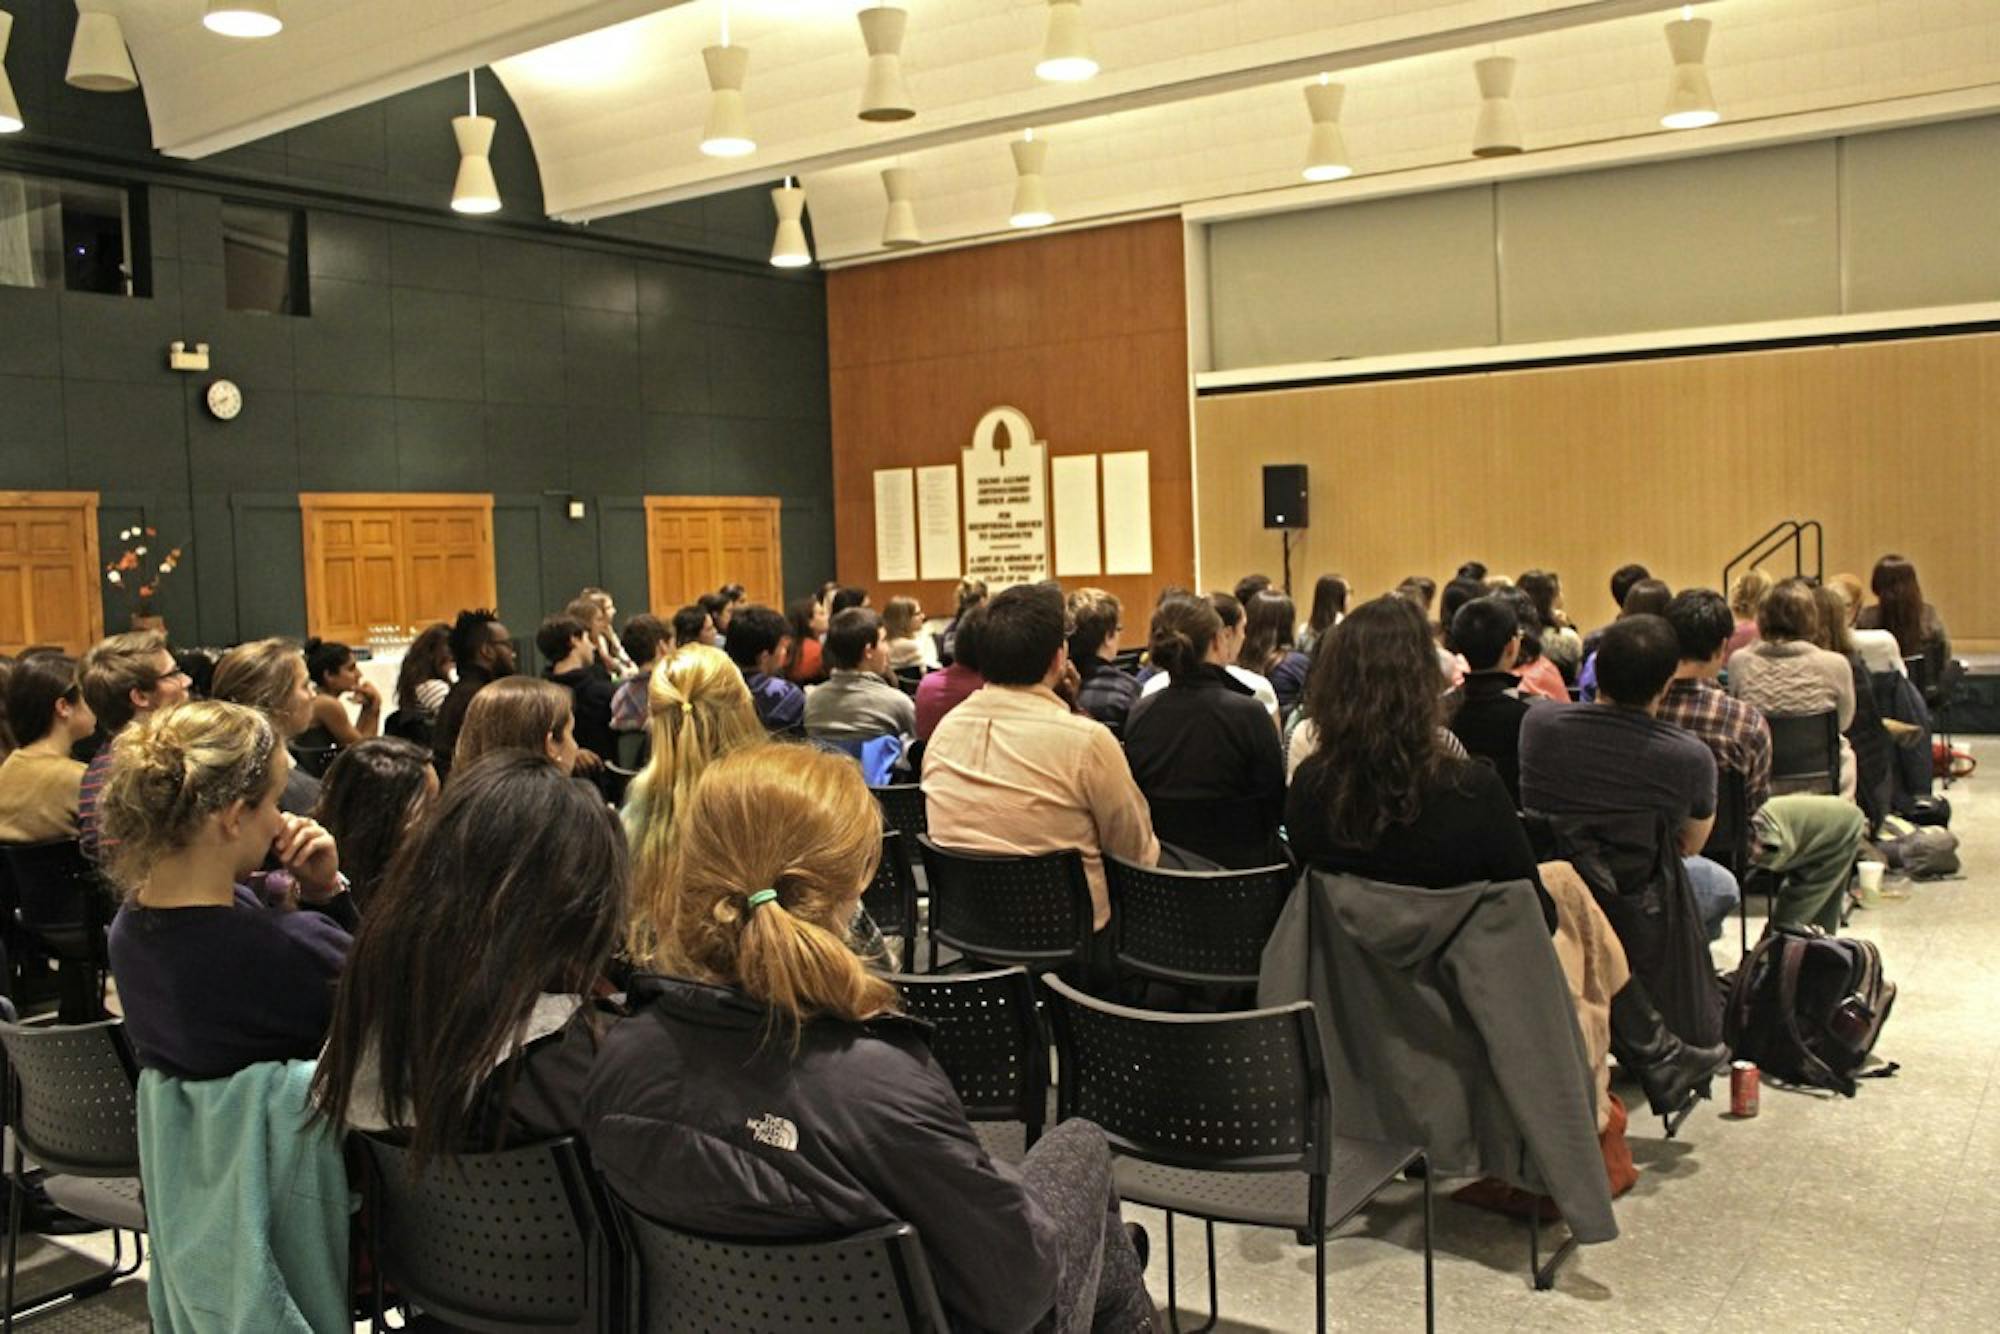 Over 70 people attended the Men of Dartmouth panel Tuesday evening.